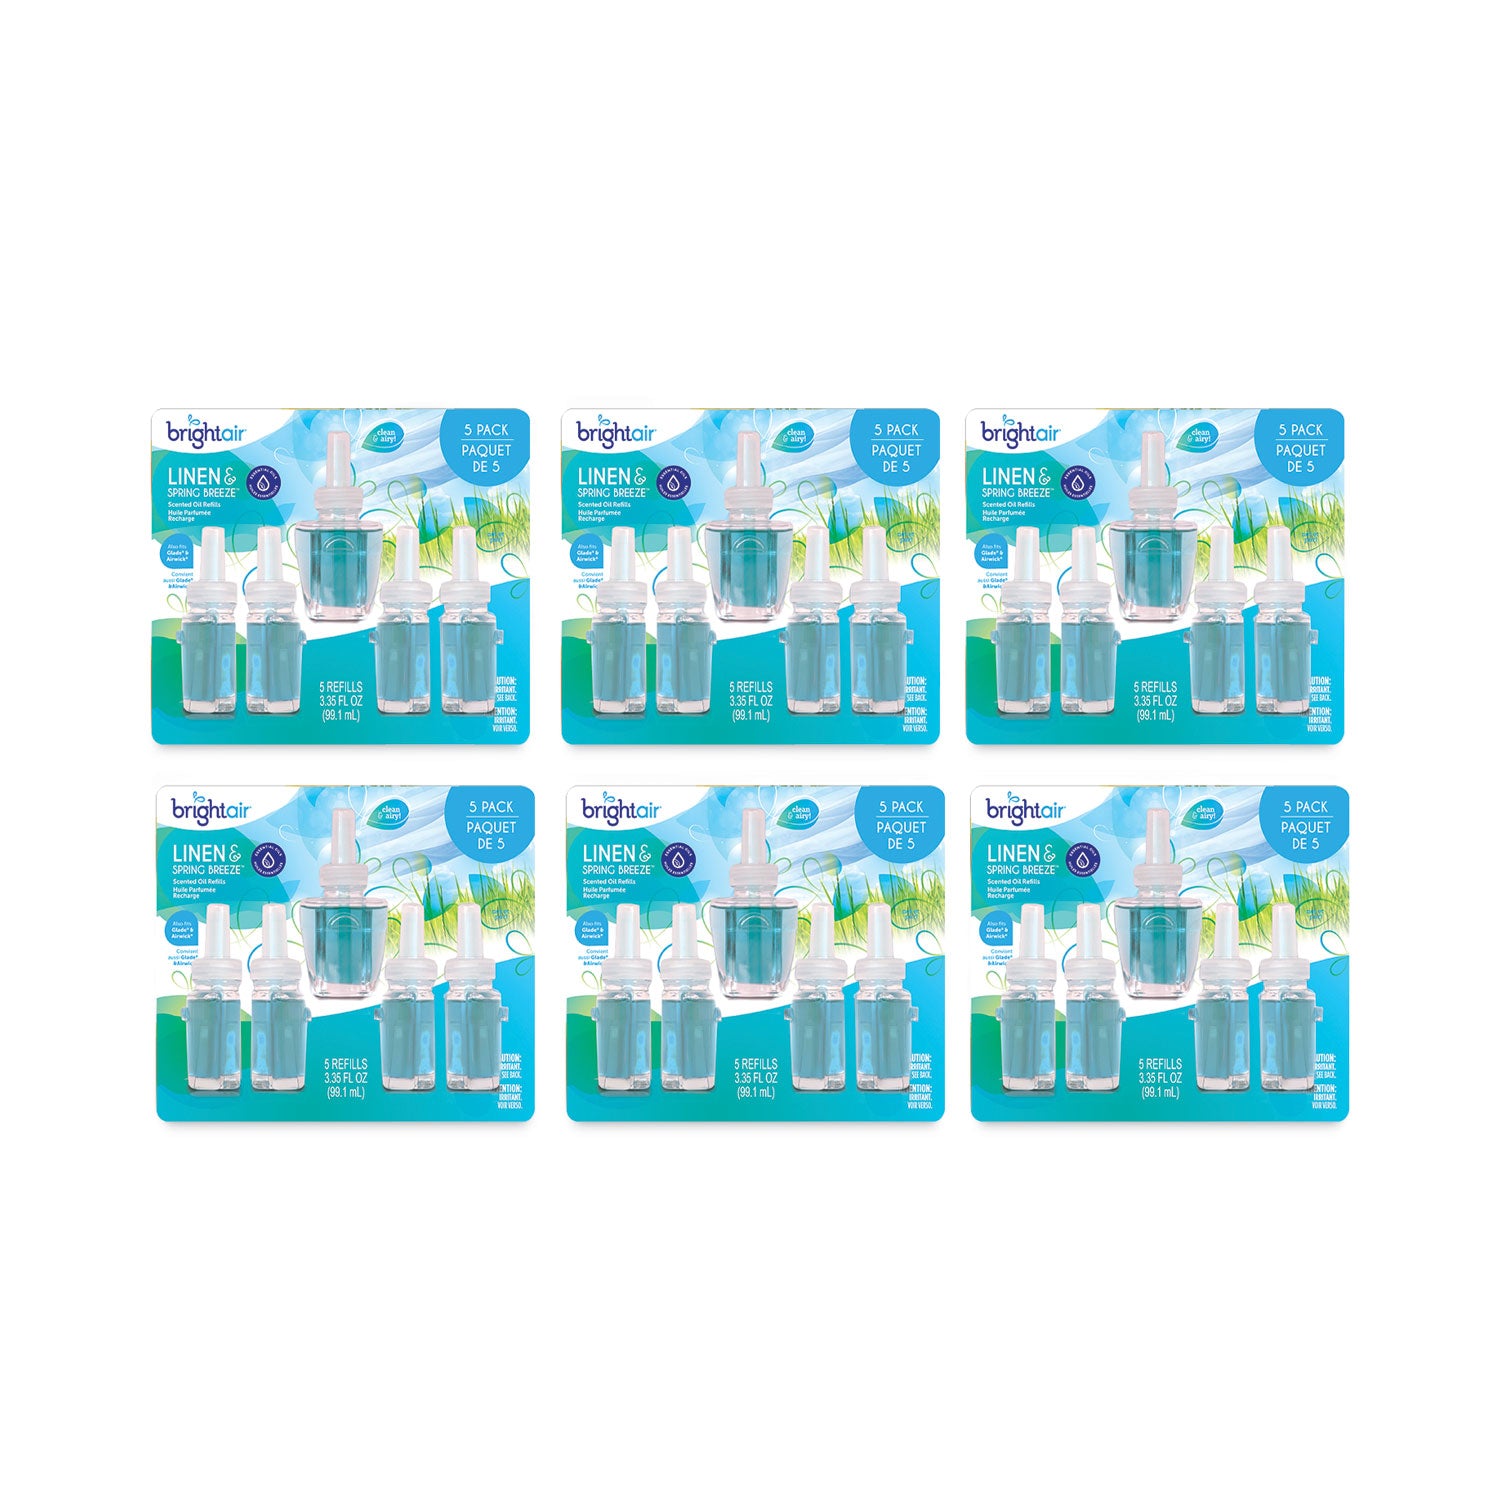 electric-scented-oil-air-freshener-refill-linen-and-spring-breeze-067-oz-bottle-5-pack-6-pack-carton_bri900669ct - 2